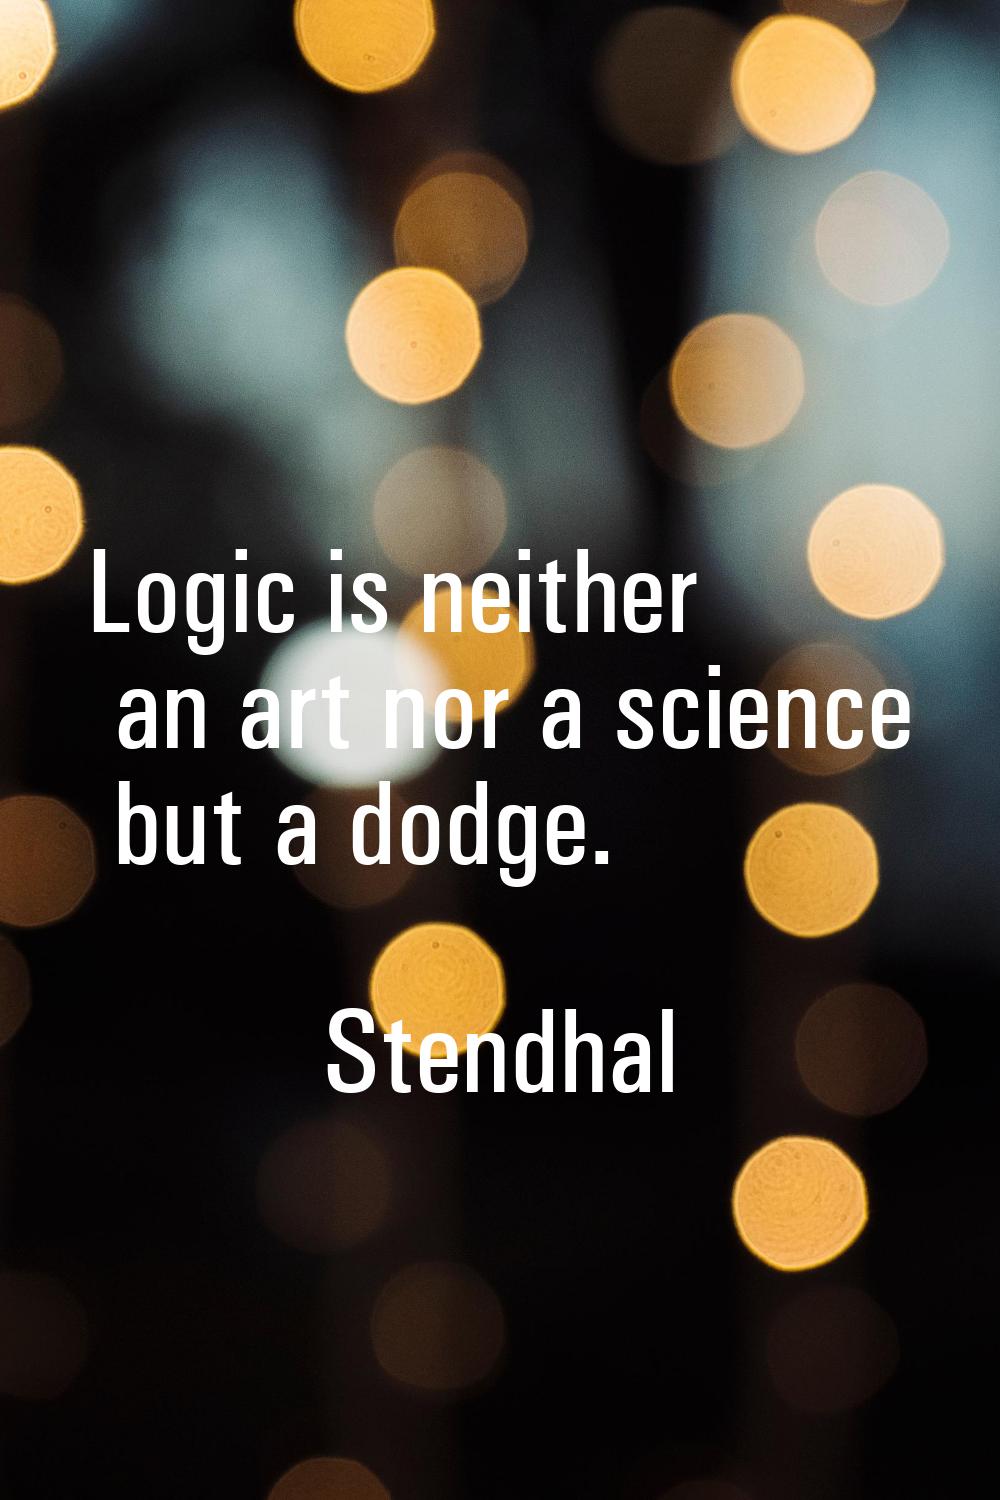 Logic is neither an art nor a science but a dodge.